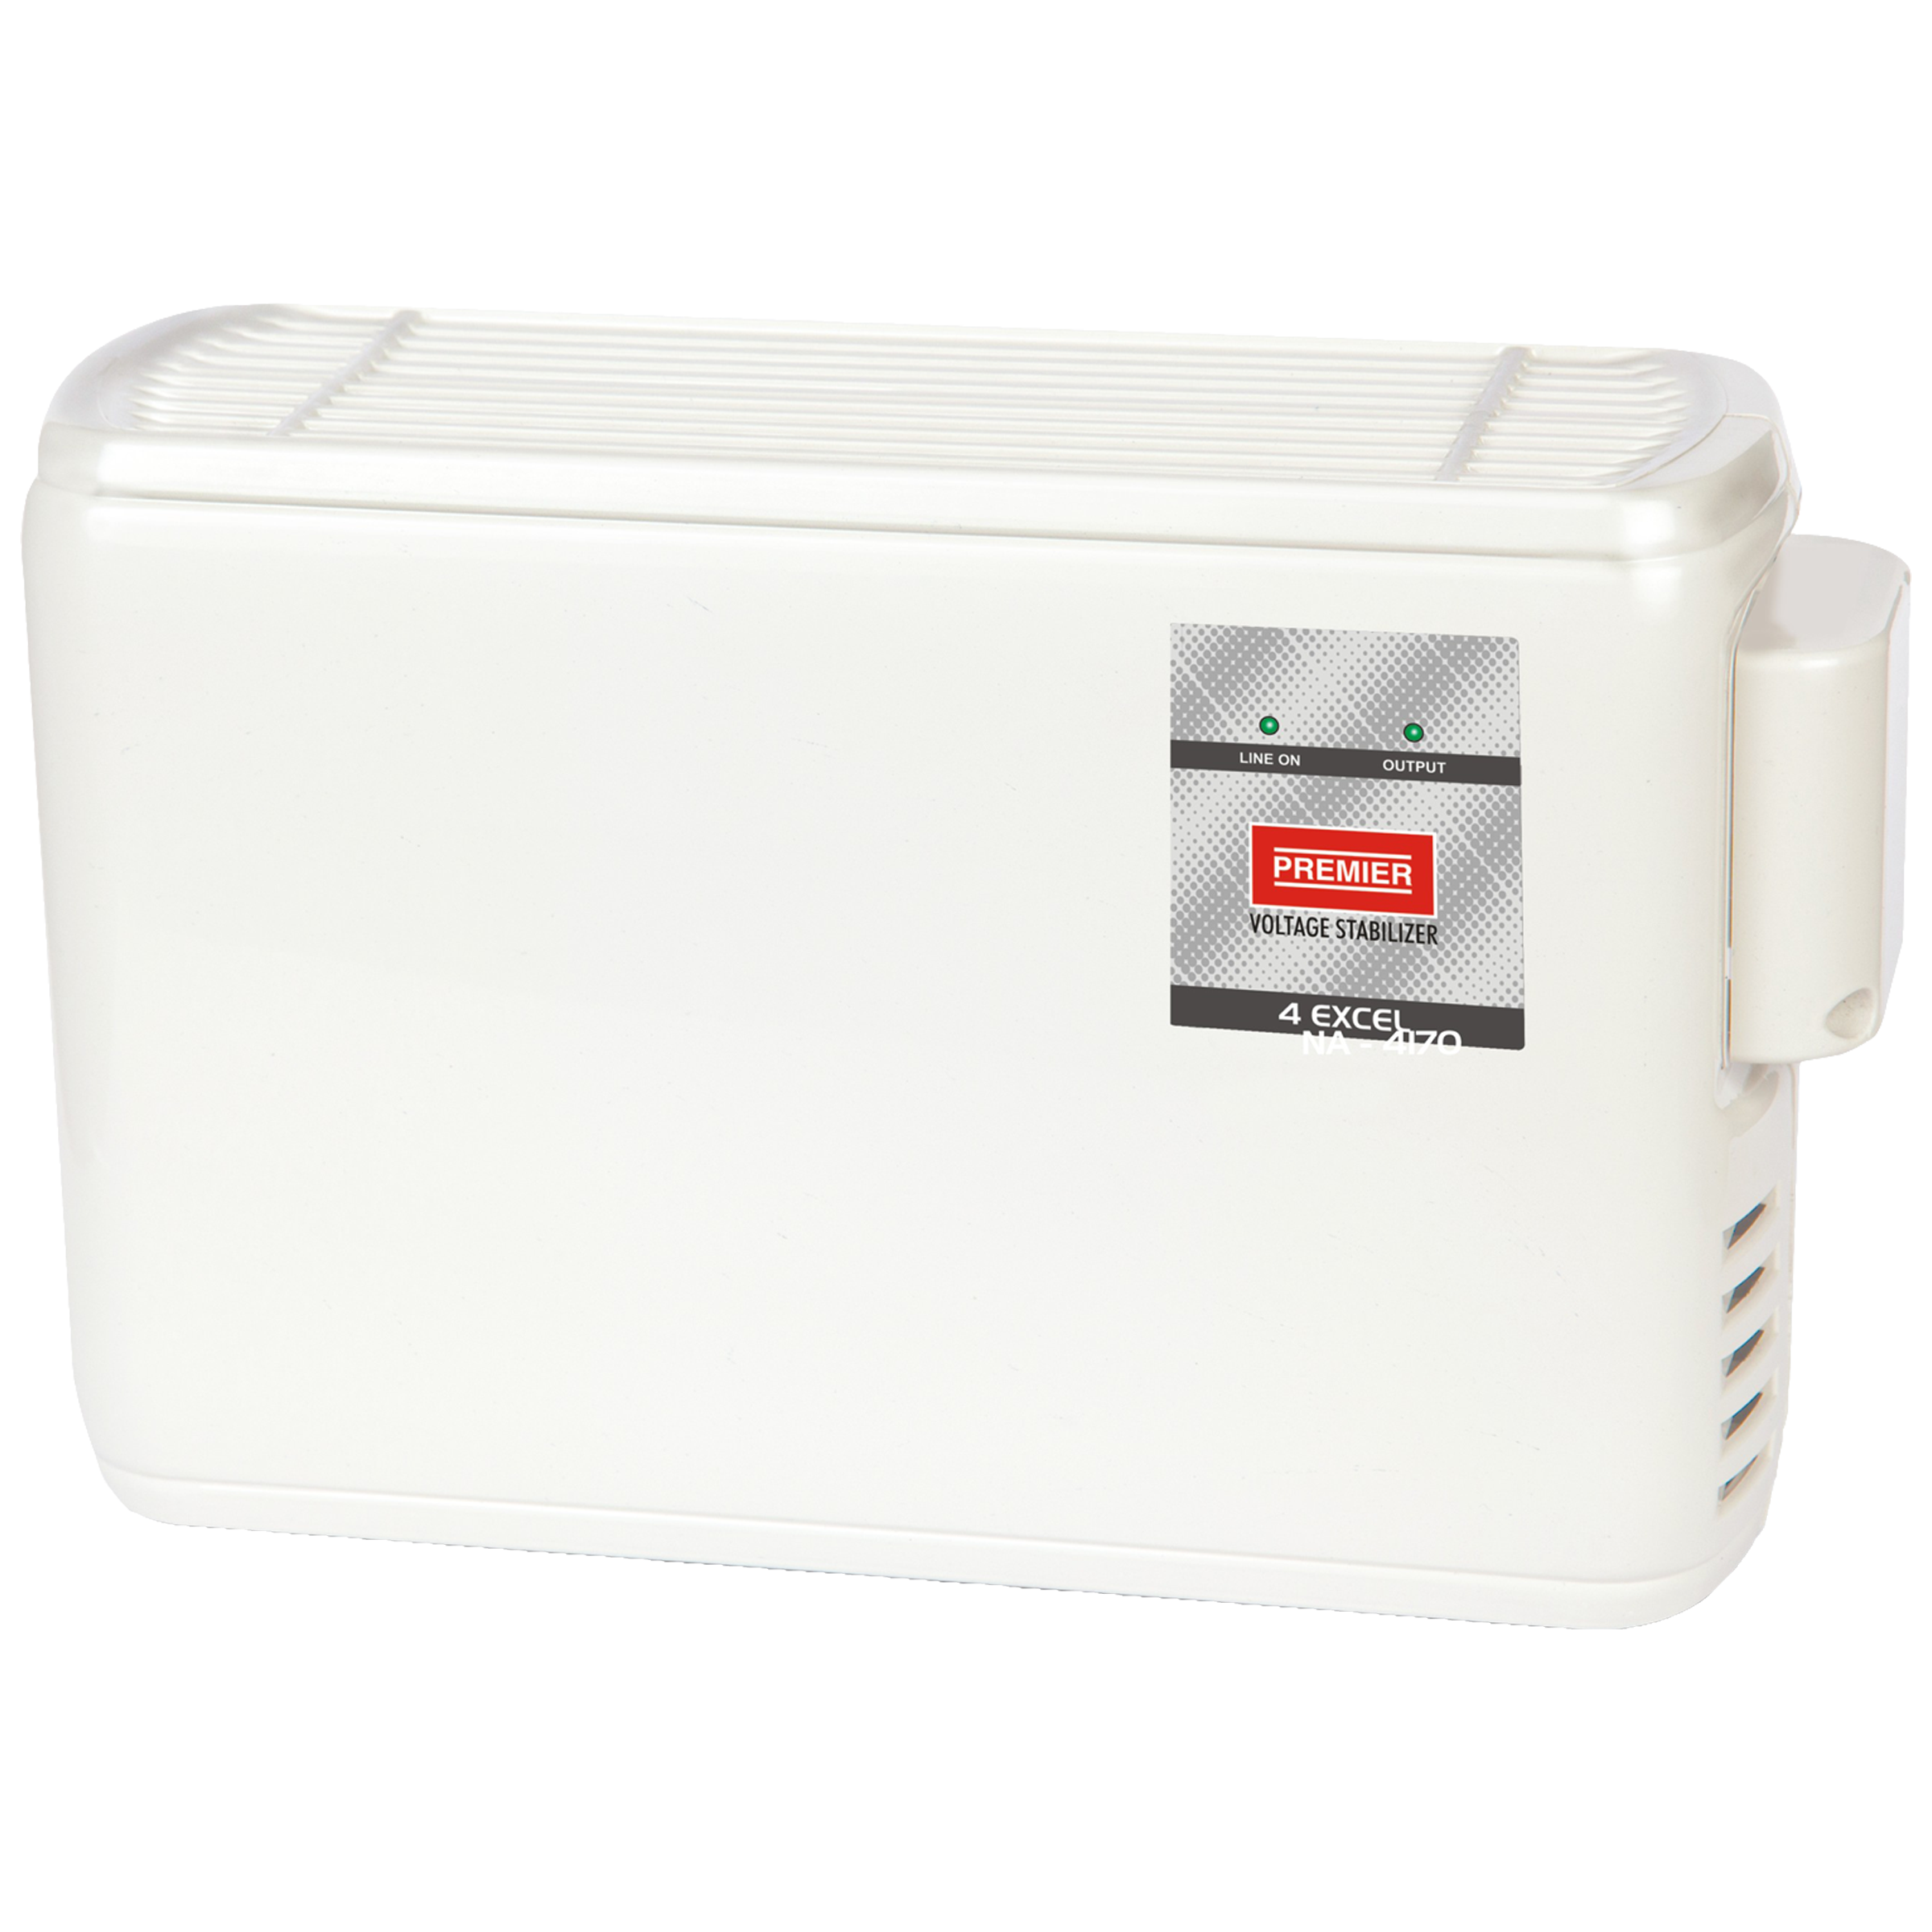 Premier 4KVA Excel Voltage Stabilizer For Up to 1.5 Ton Air Conditioner (200-250 V, Thermal Protection, 169915, White)